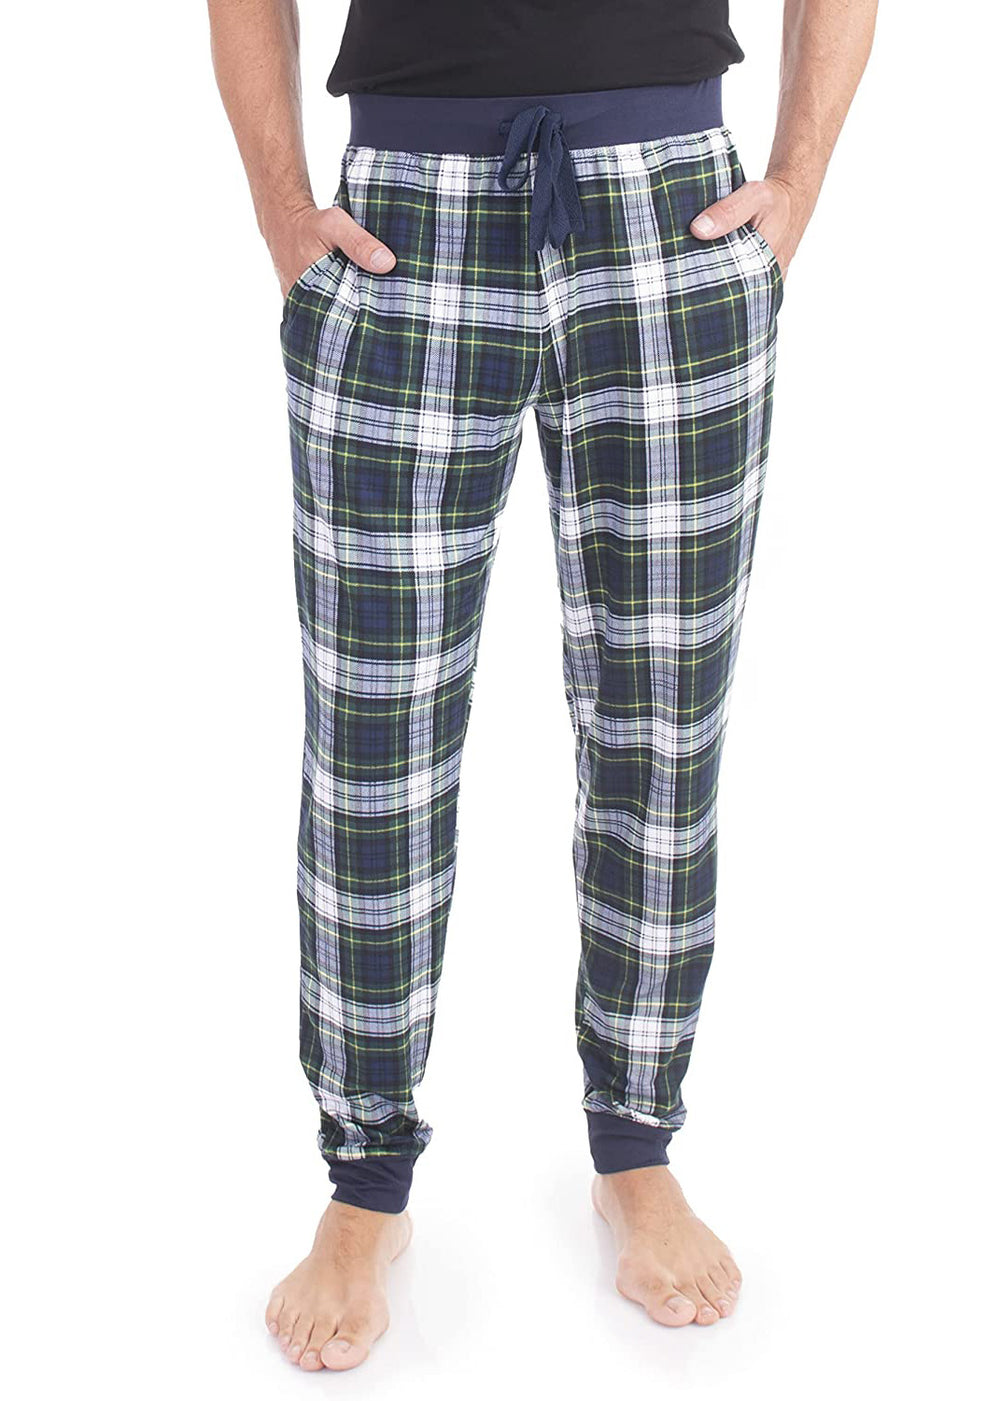 PJ joggers with soft velvety texture, stretch, elastic waistband, drawstring, and stylish ankle cuff. This pattern is a white, yellow and navy plaid. The waist and the cuffs are navy